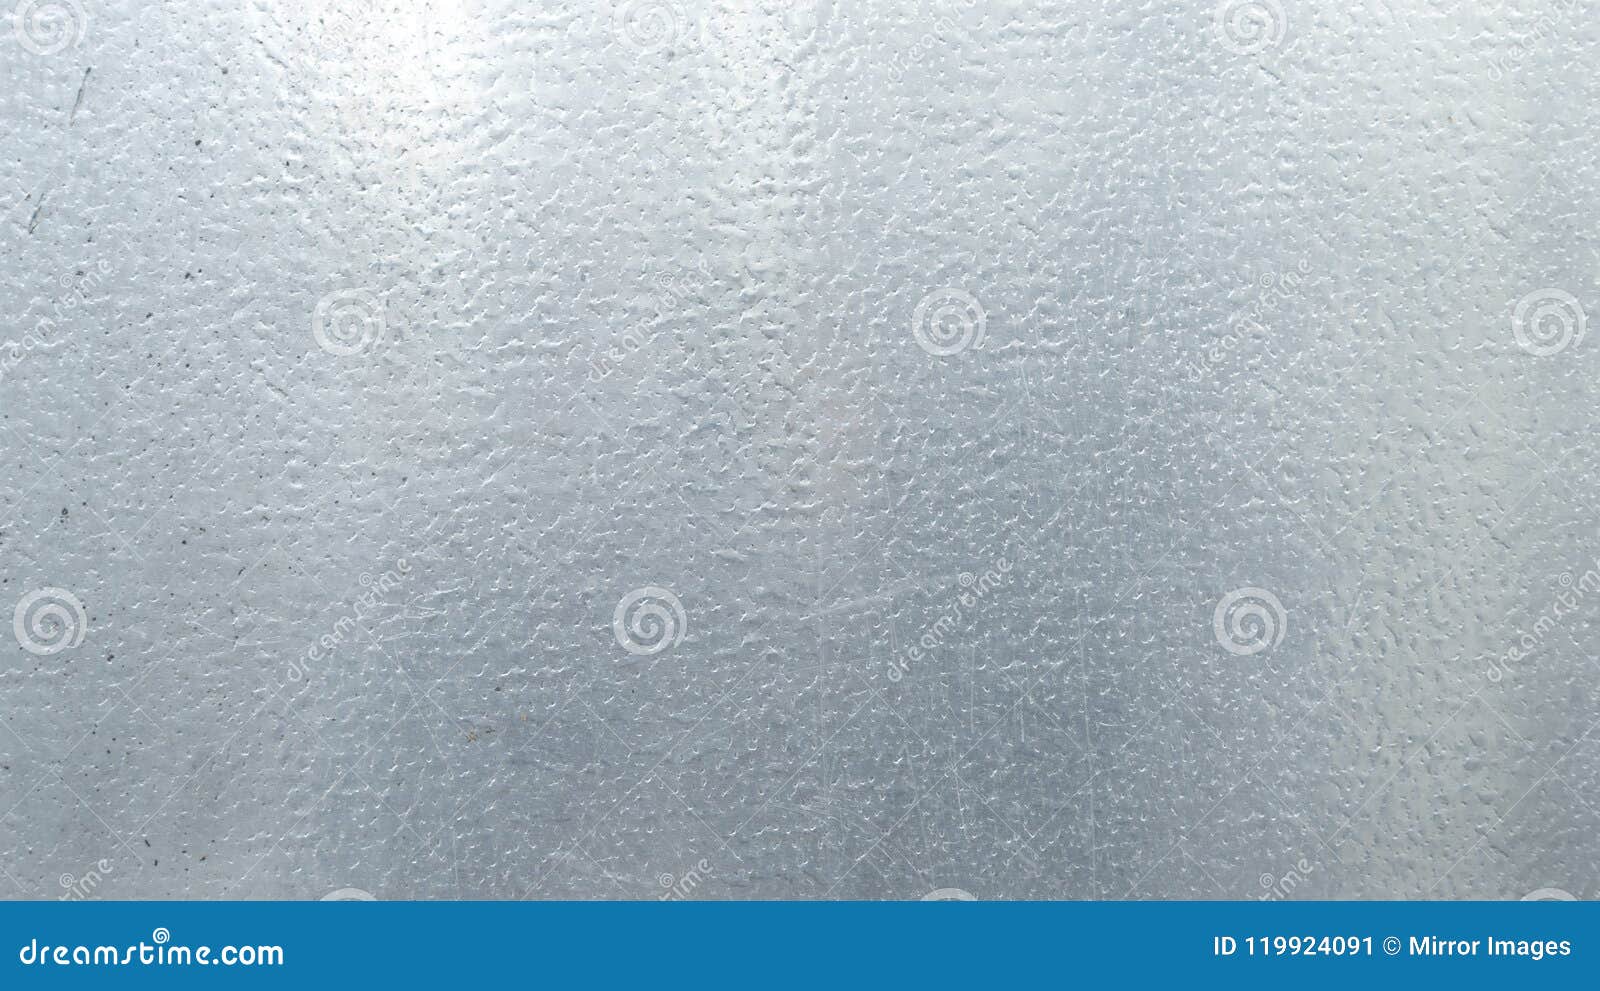 silver modeled stainless steel surface background